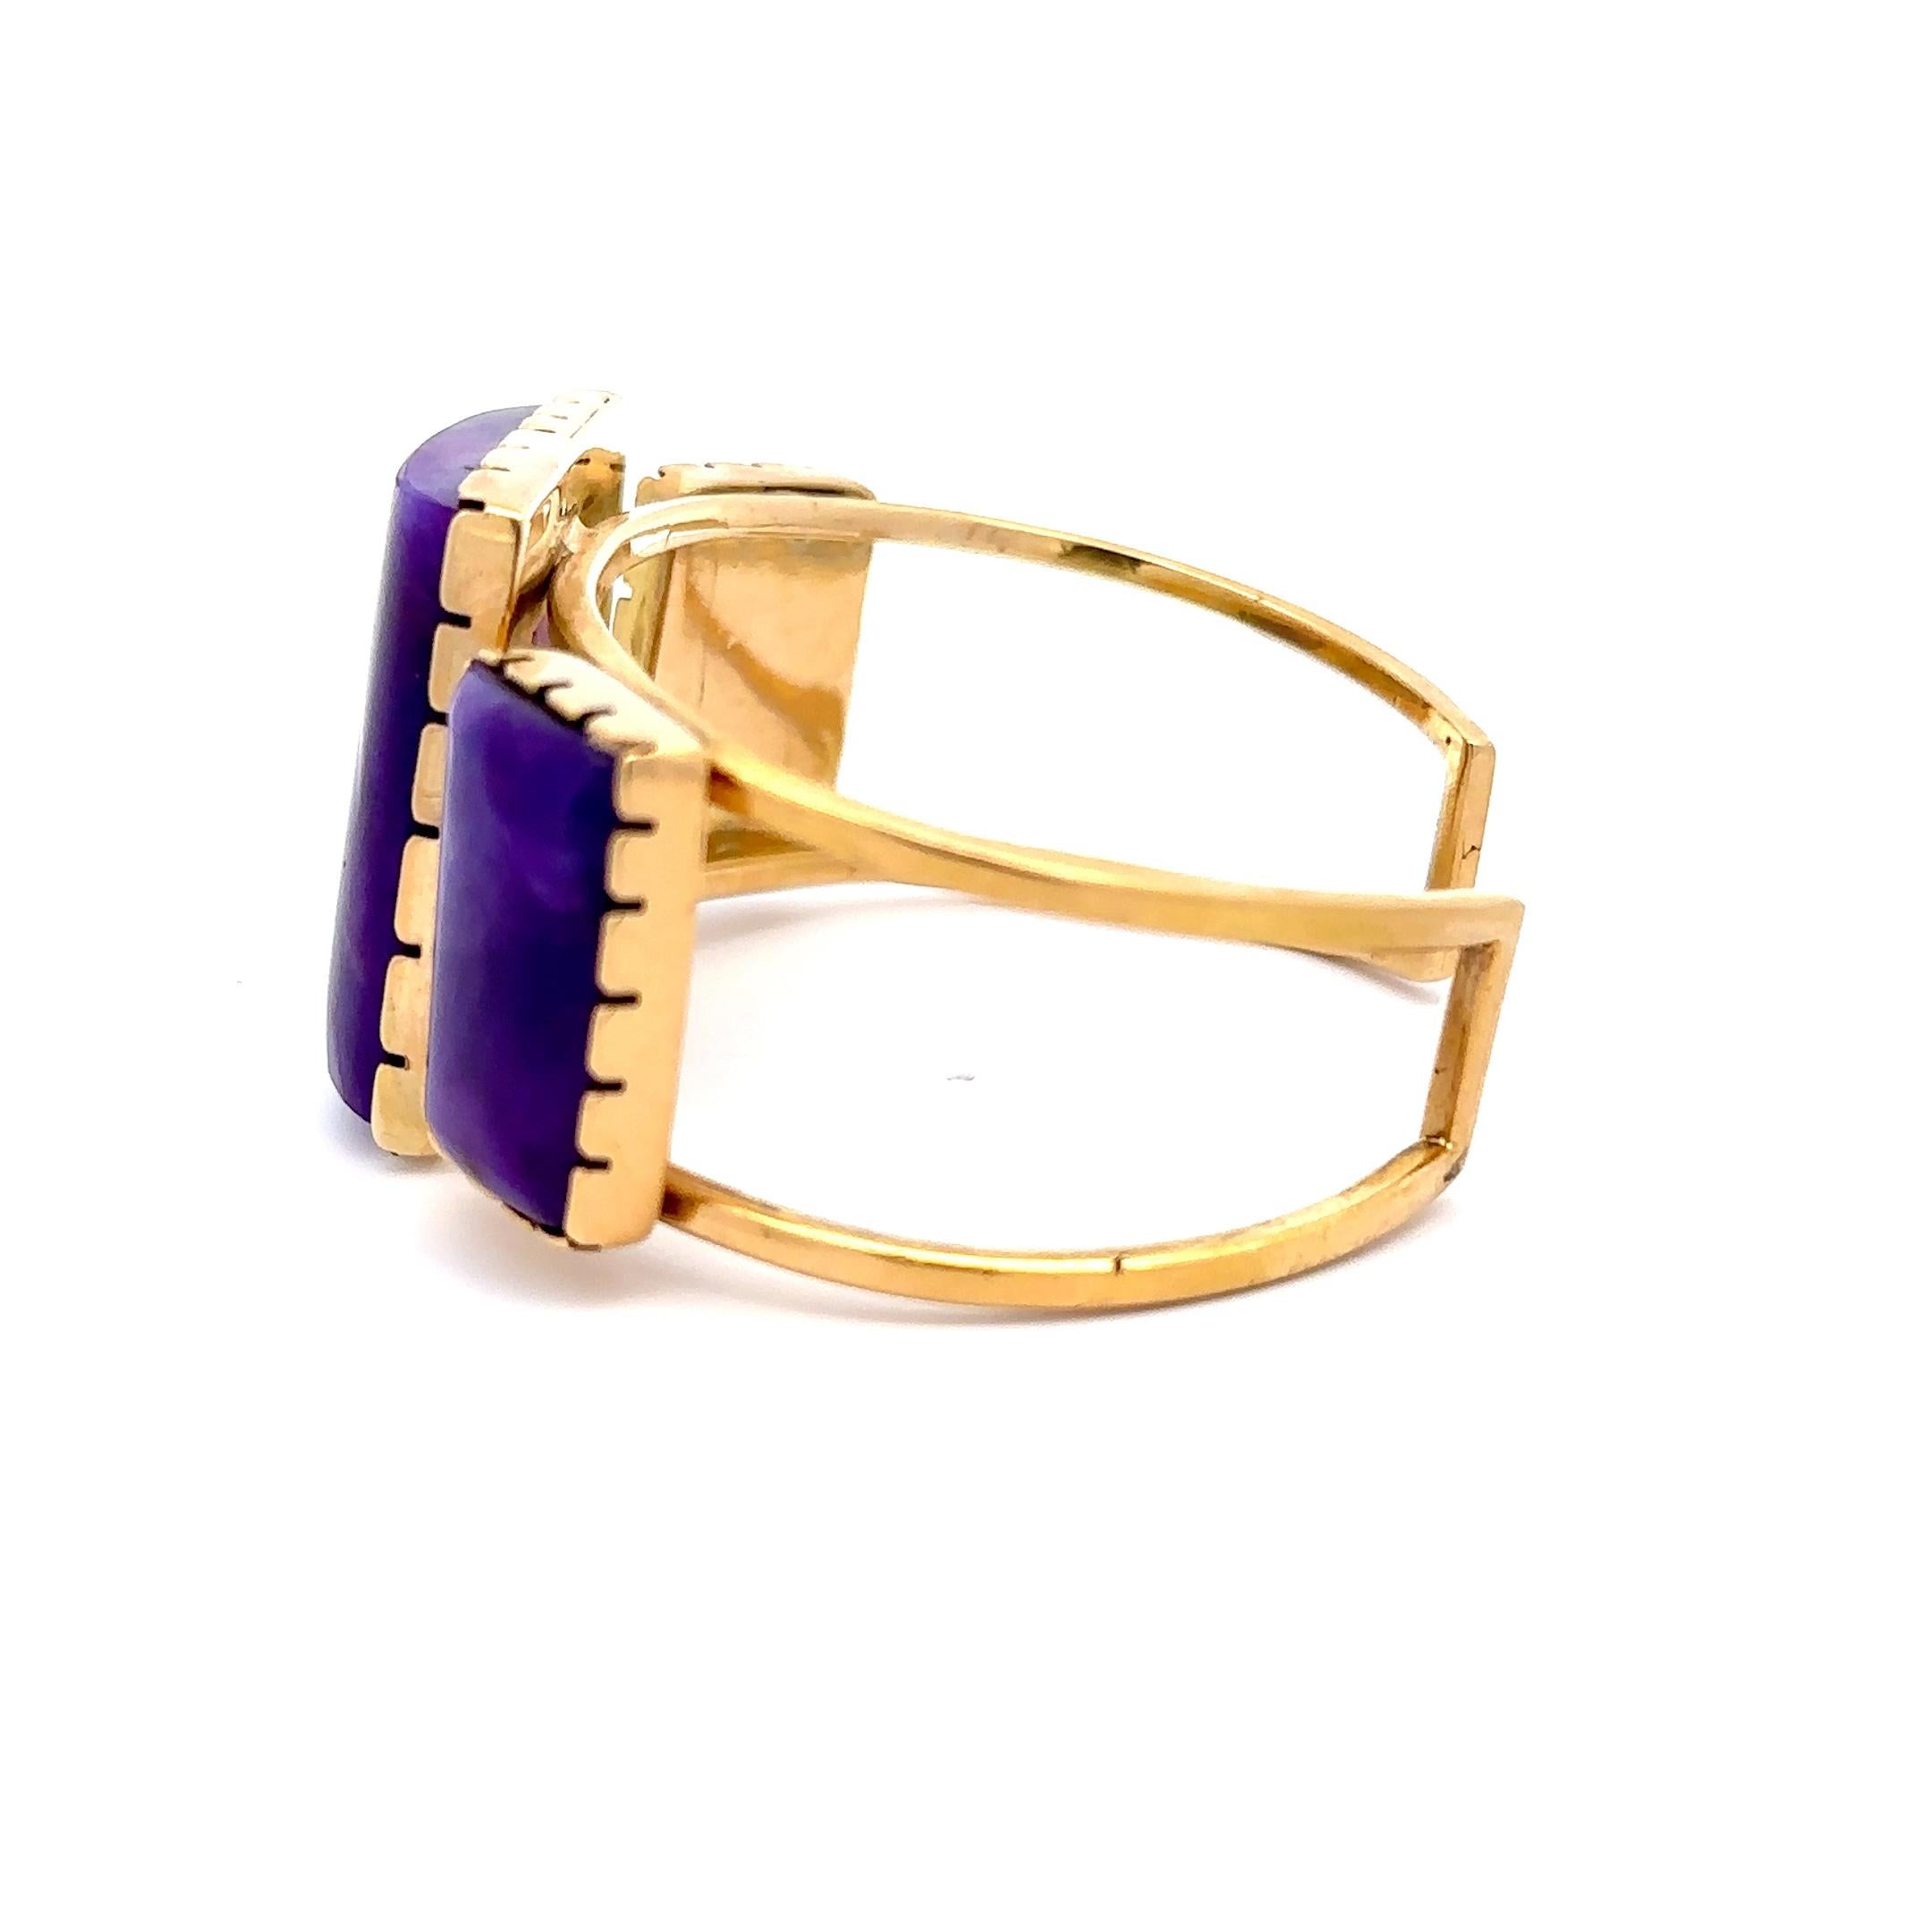 Rare Sugilite Cuff Bracelet In Excellent Condition For Sale In Vail, CO